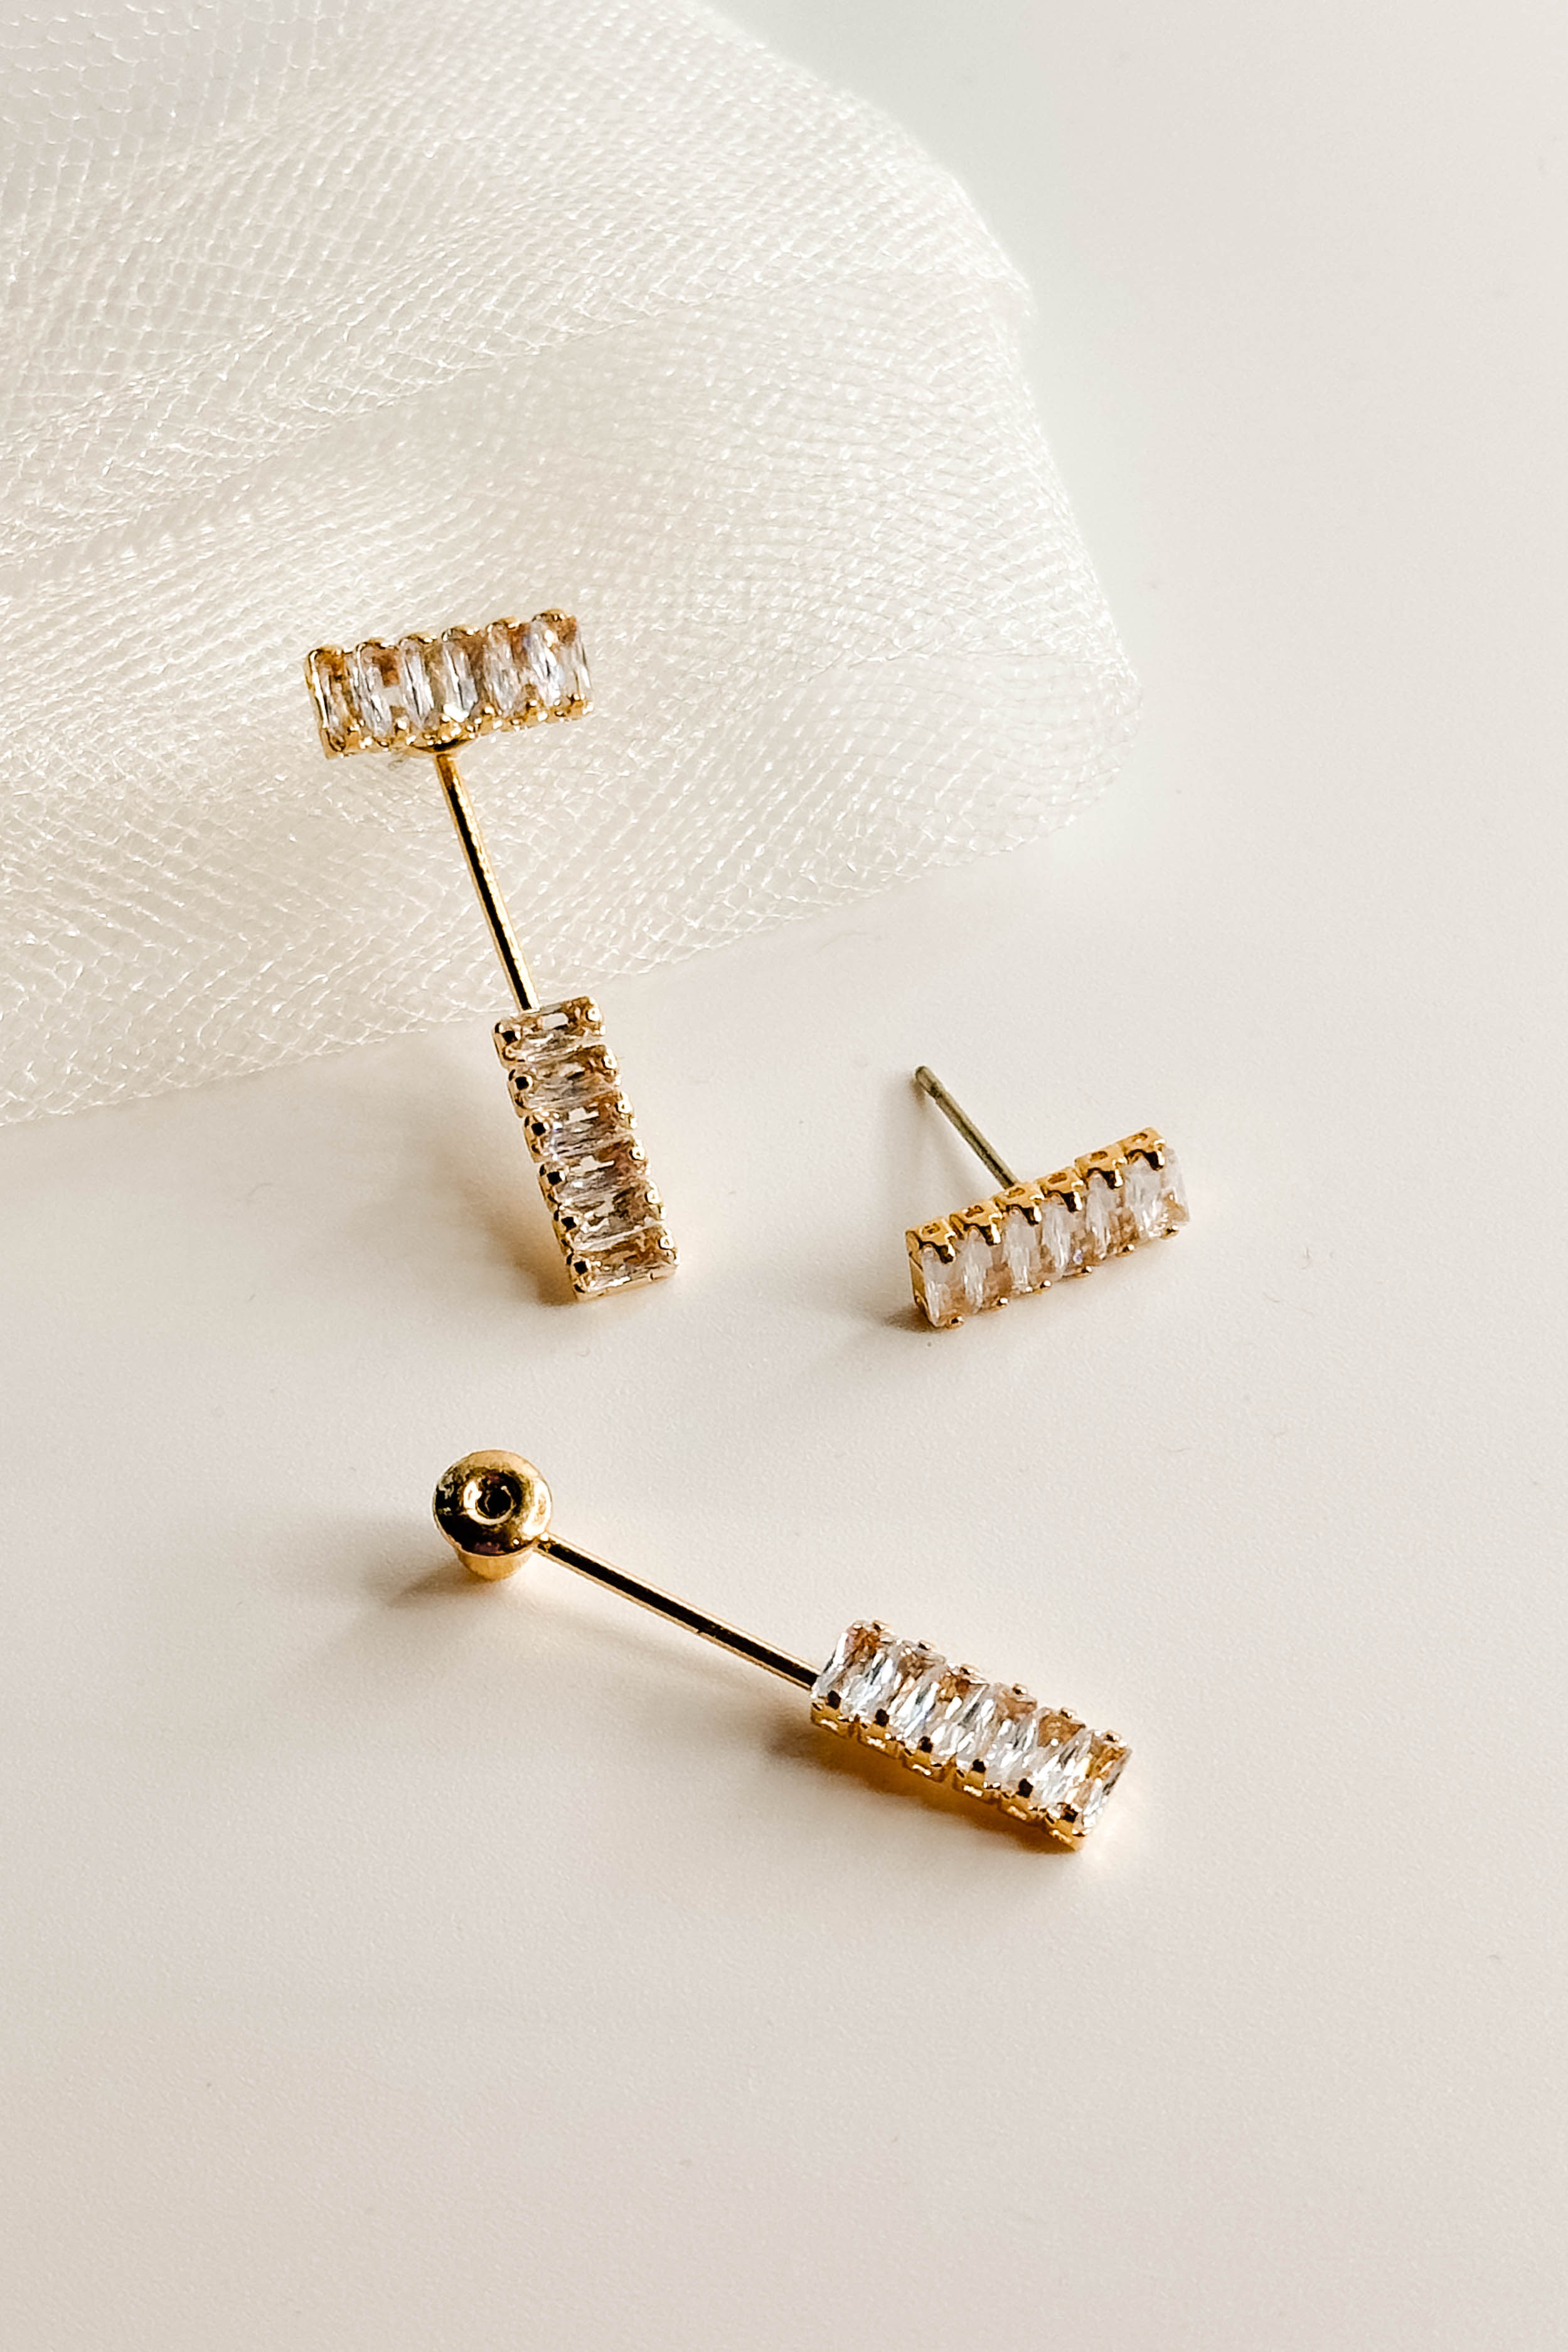 Top view of the So Easy Earrings which features cluster of clear stones linked by a gold bar with another set of clear stones, shown on white paper.